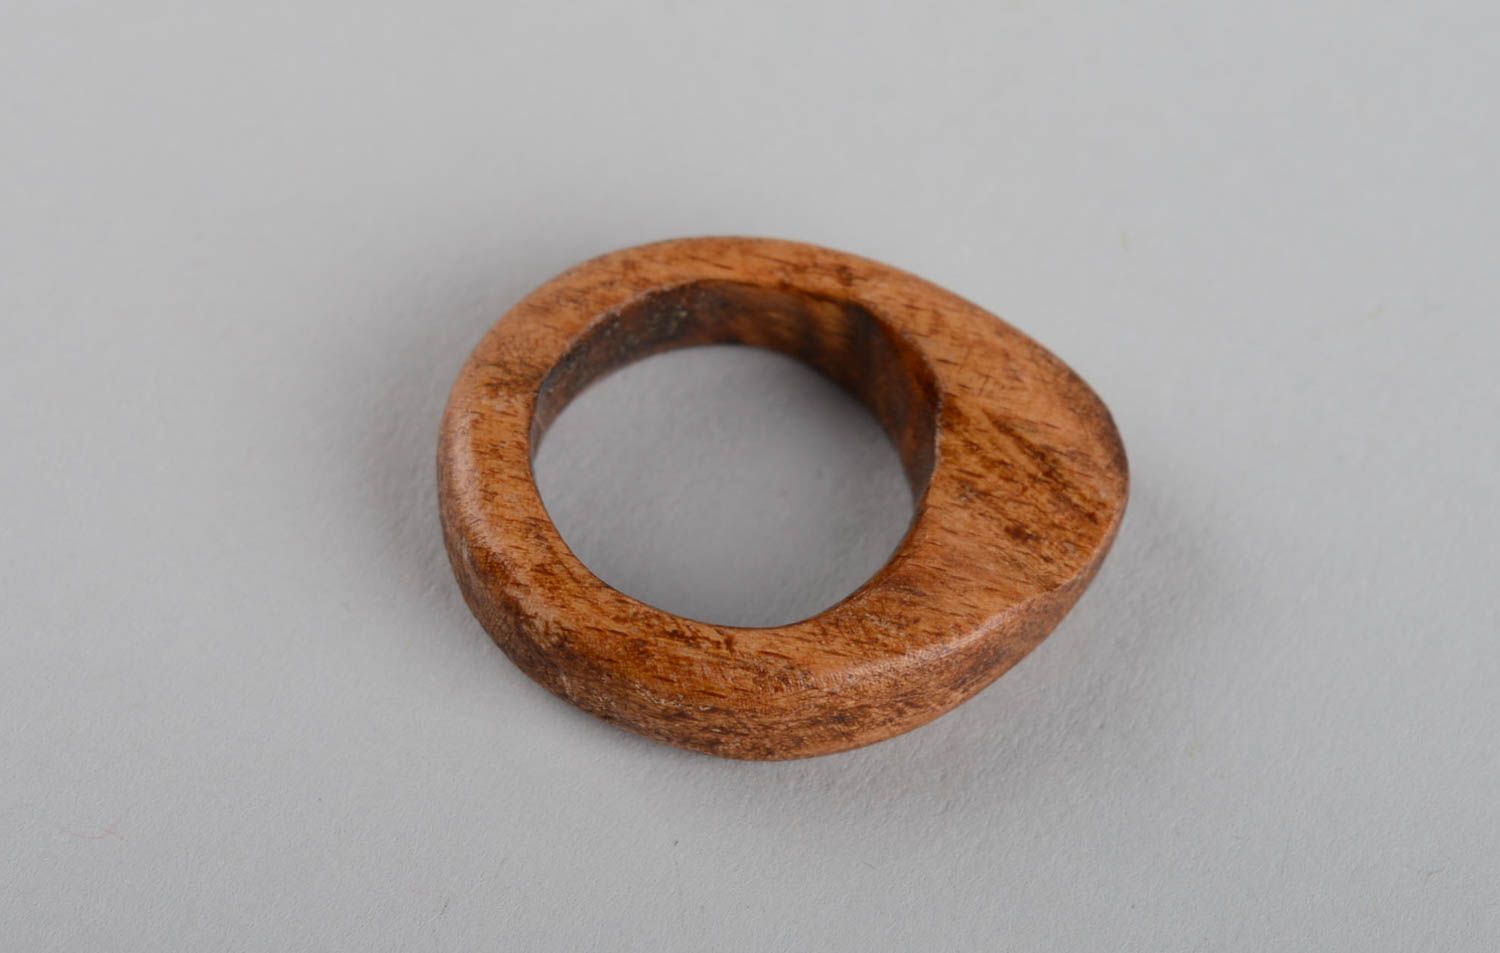 Unusual handmade wooden ring wood craft costume jewelry designs gifts for her photo 10